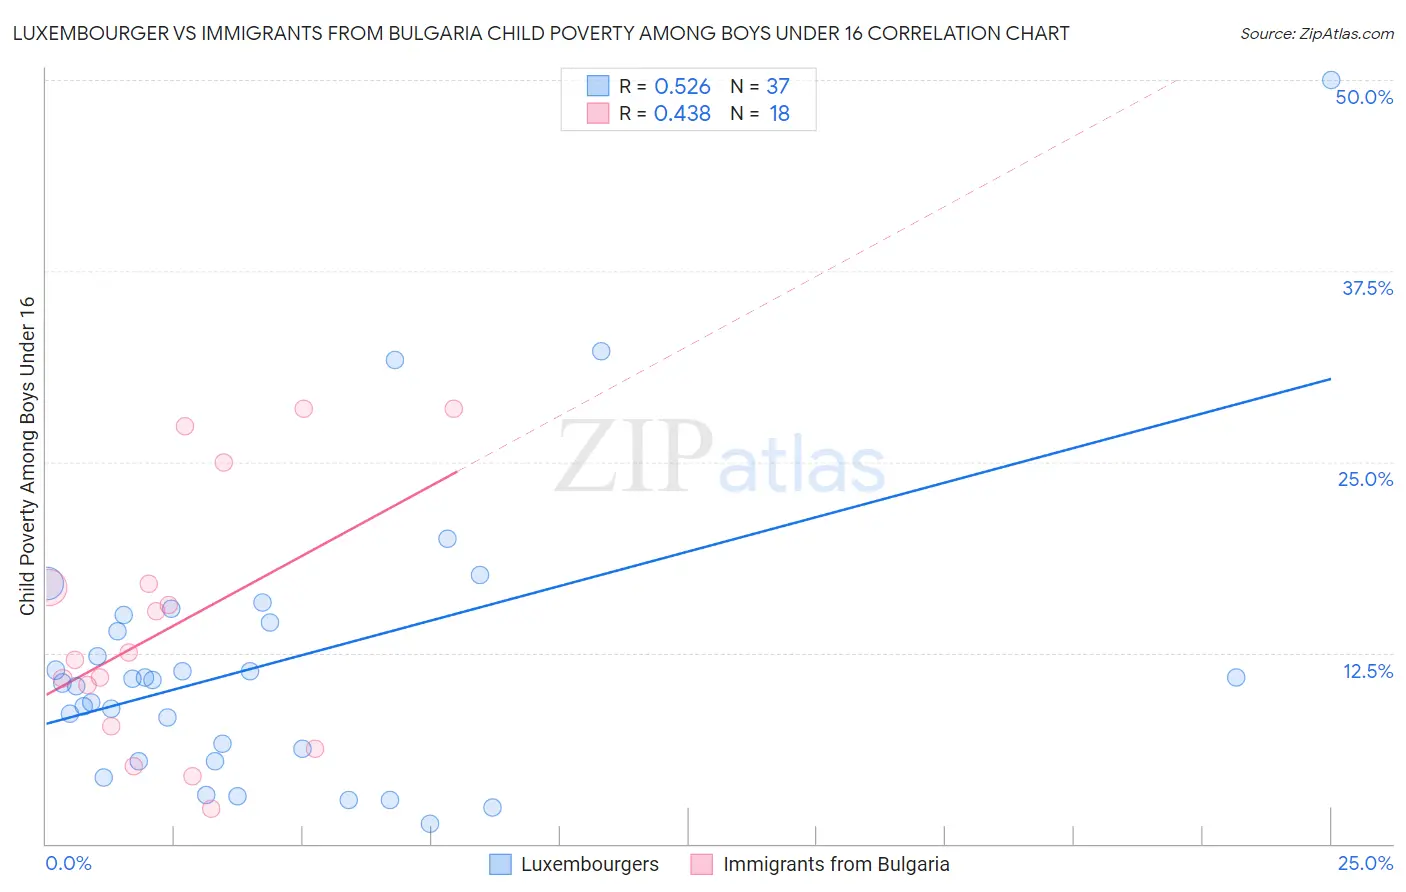 Luxembourger vs Immigrants from Bulgaria Child Poverty Among Boys Under 16